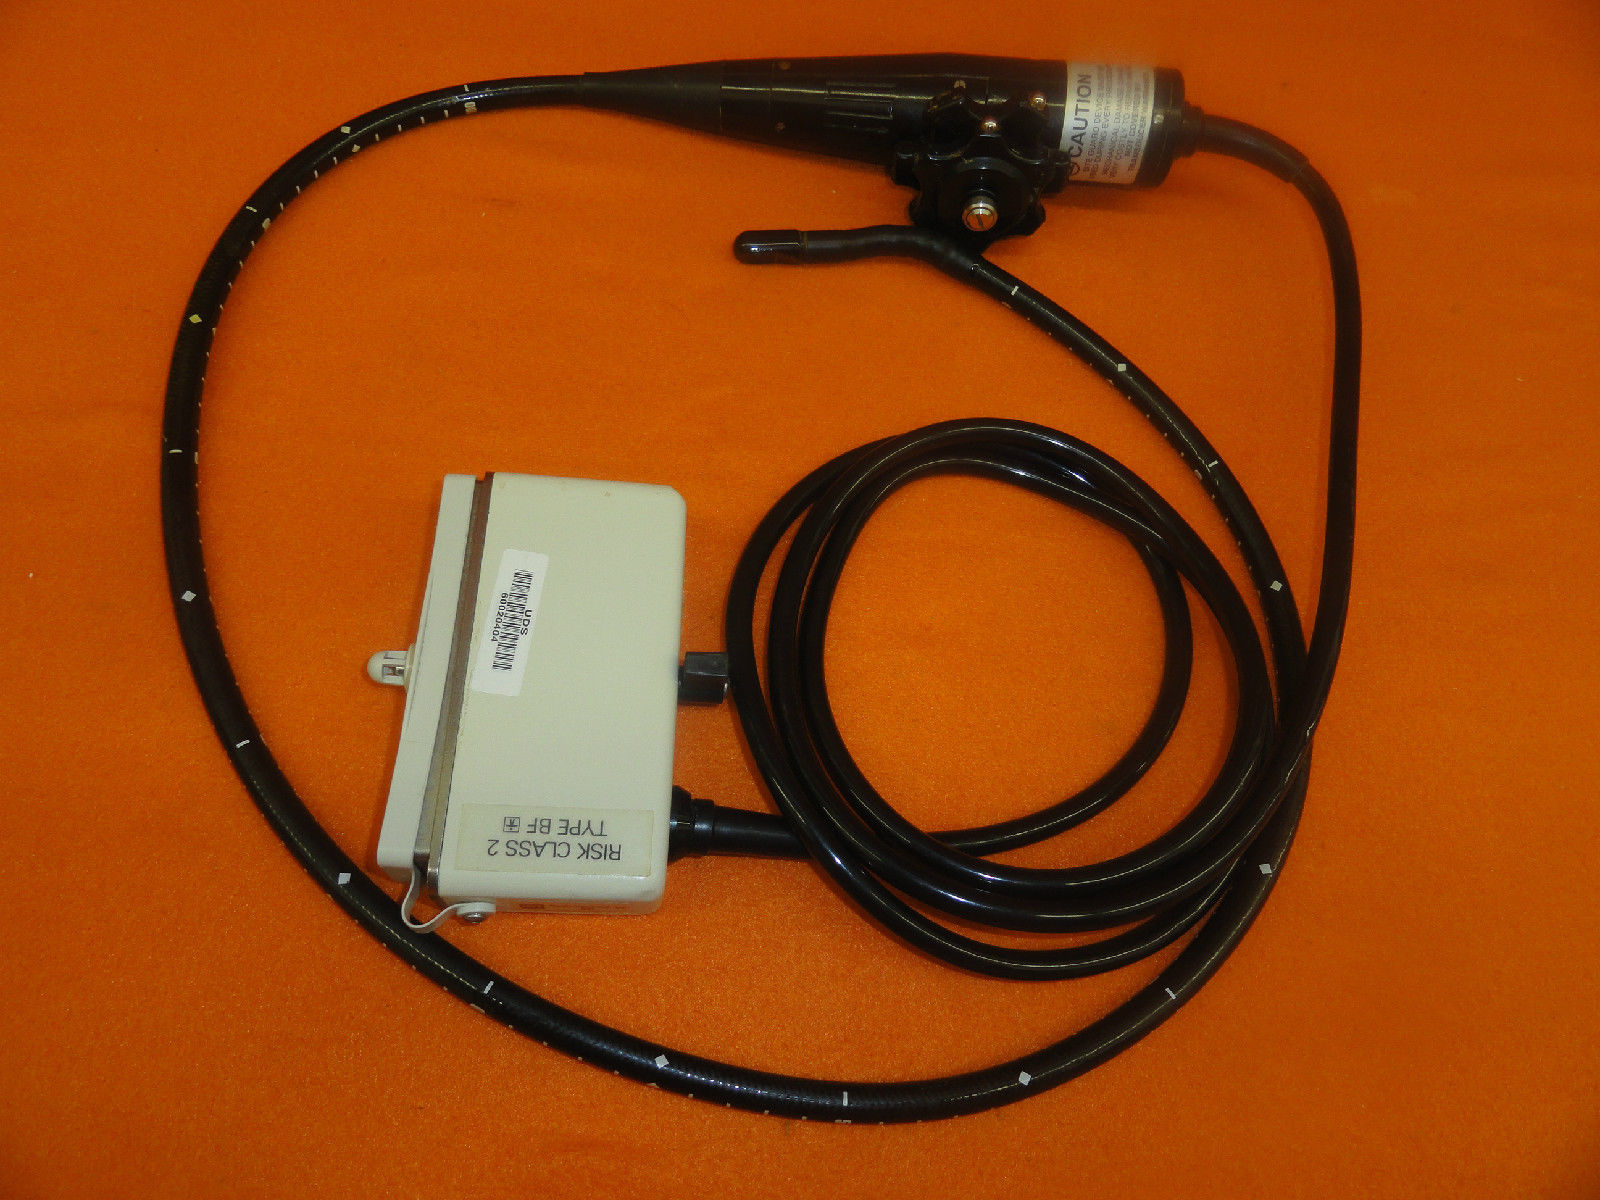 ATL Phased Array 5.0 MHz Single Plane Transesophageal (TEE) Probe (5583 ) DIAGNOSTIC ULTRASOUND MACHINES FOR SALE